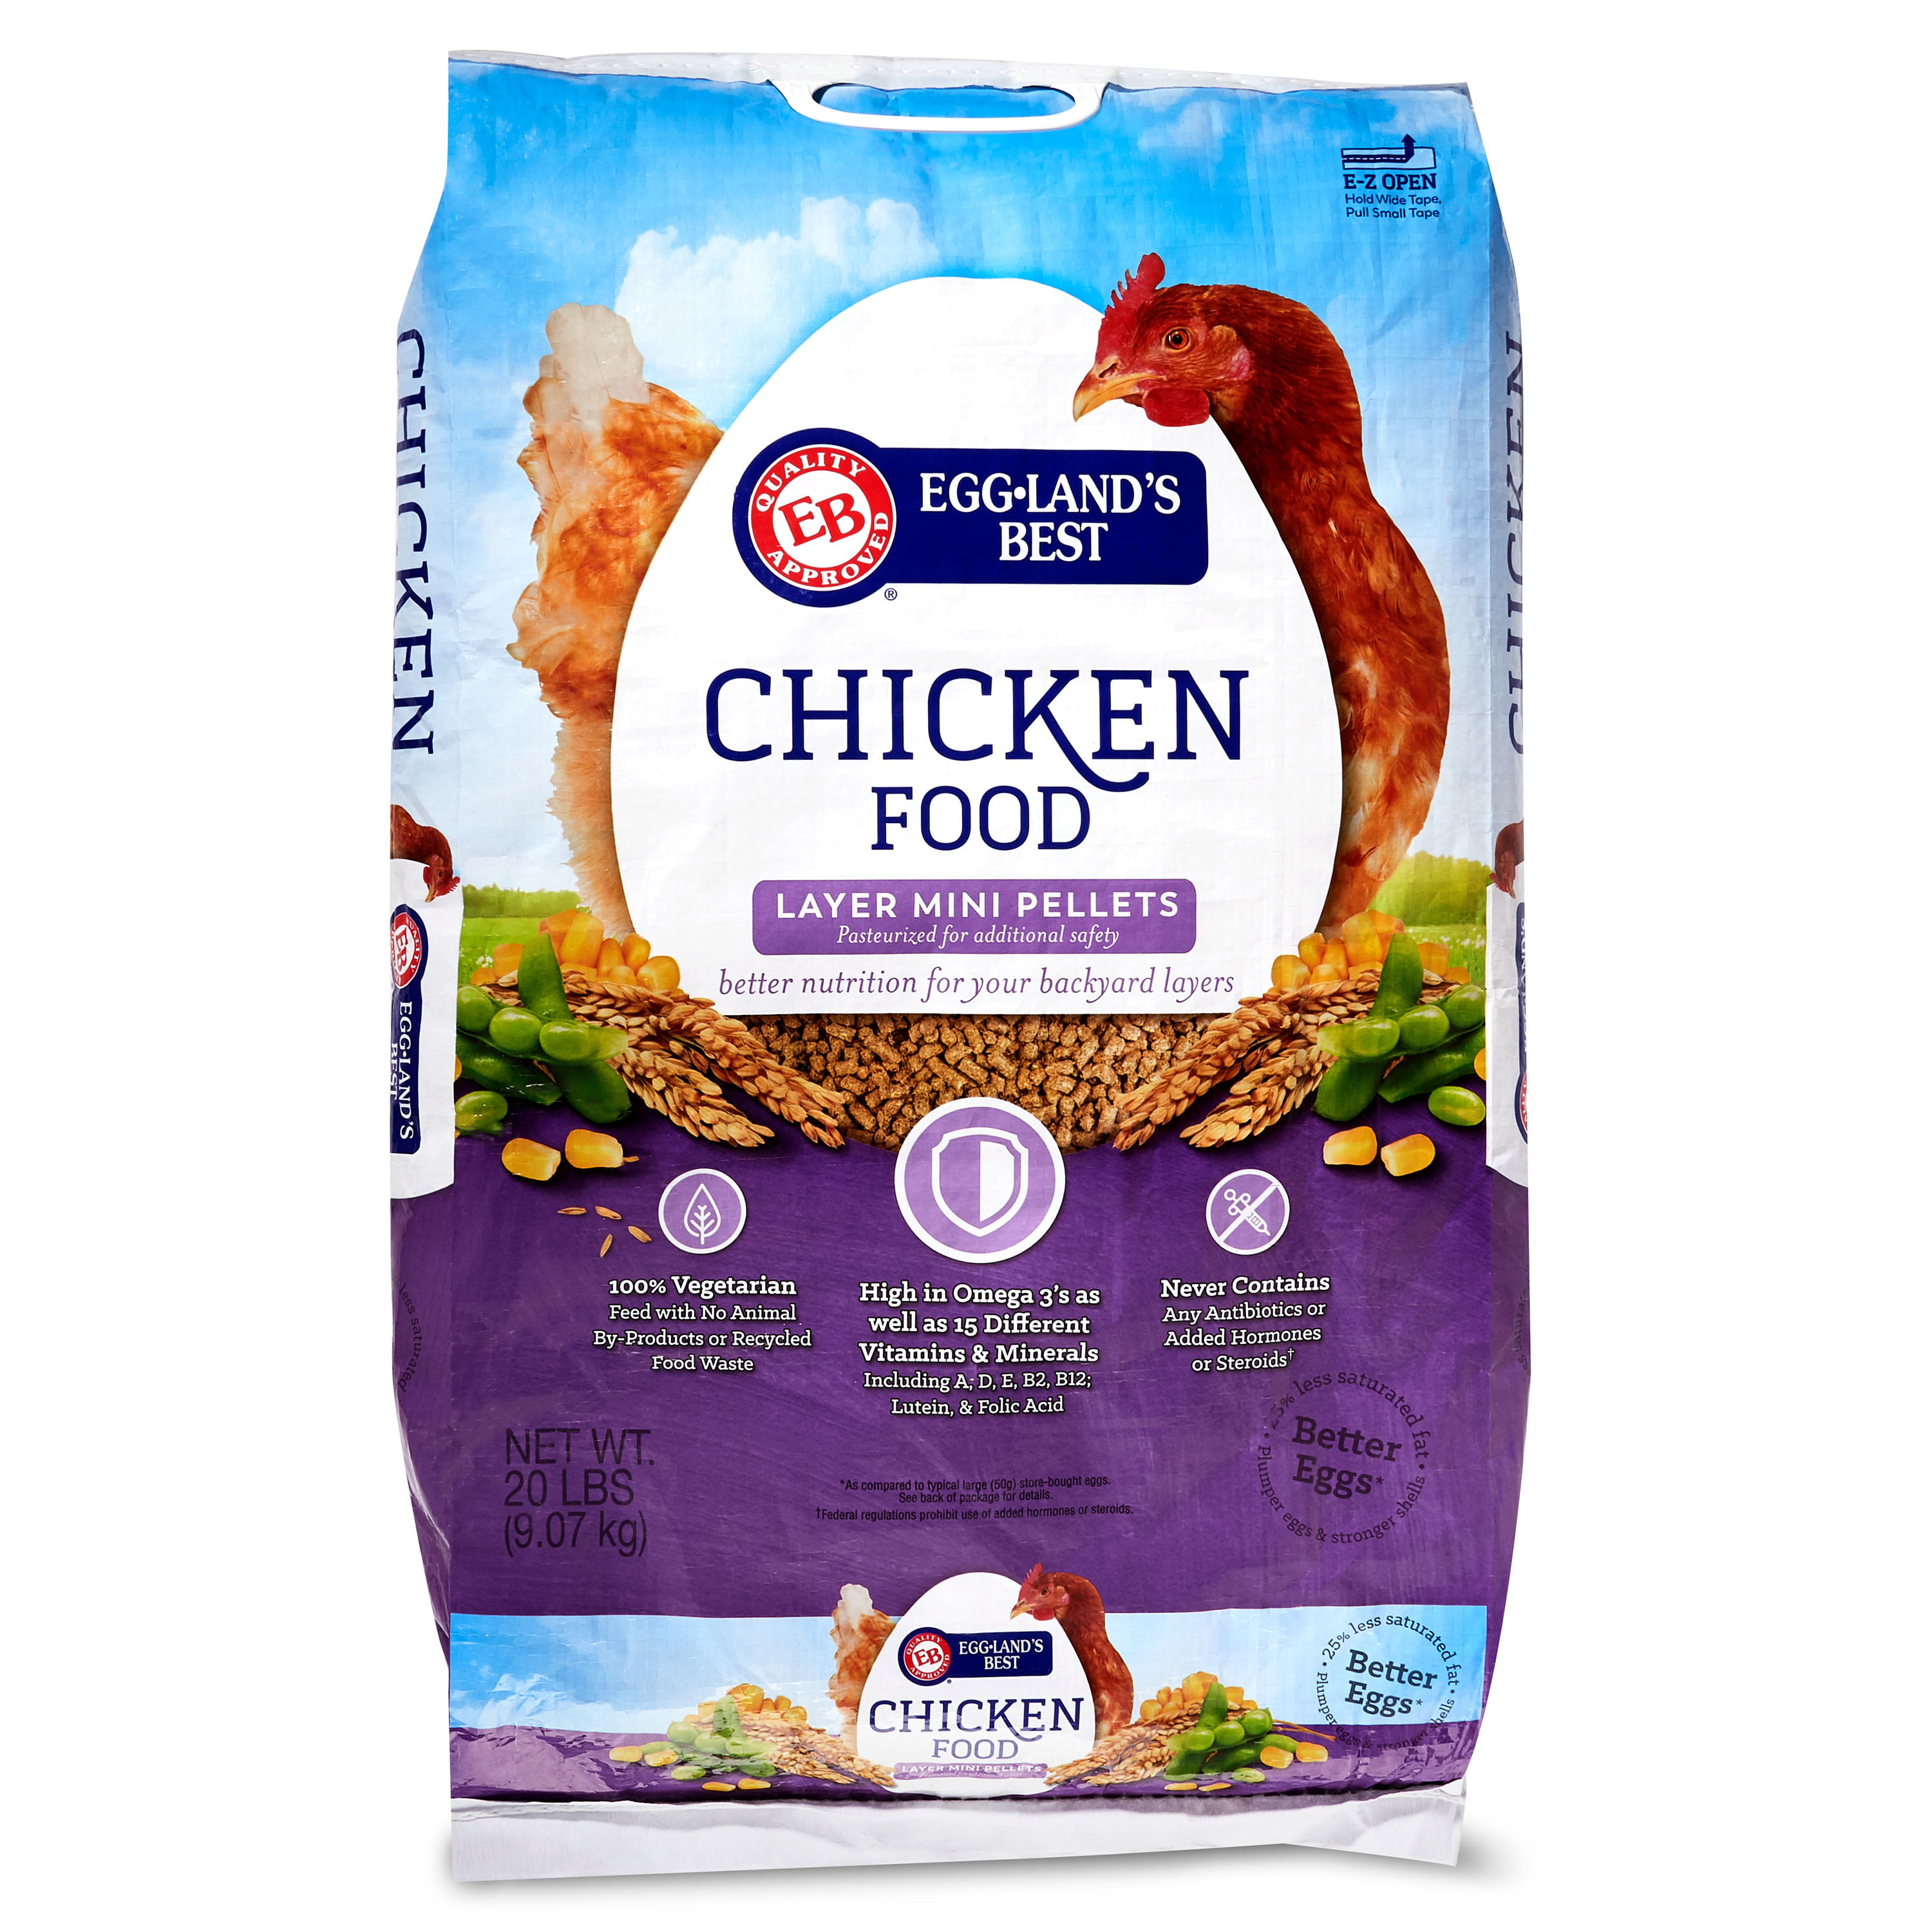 Manna Pro Family Farm 50 lbs. Medicated Chick Starter Crumble Chicken Feed 